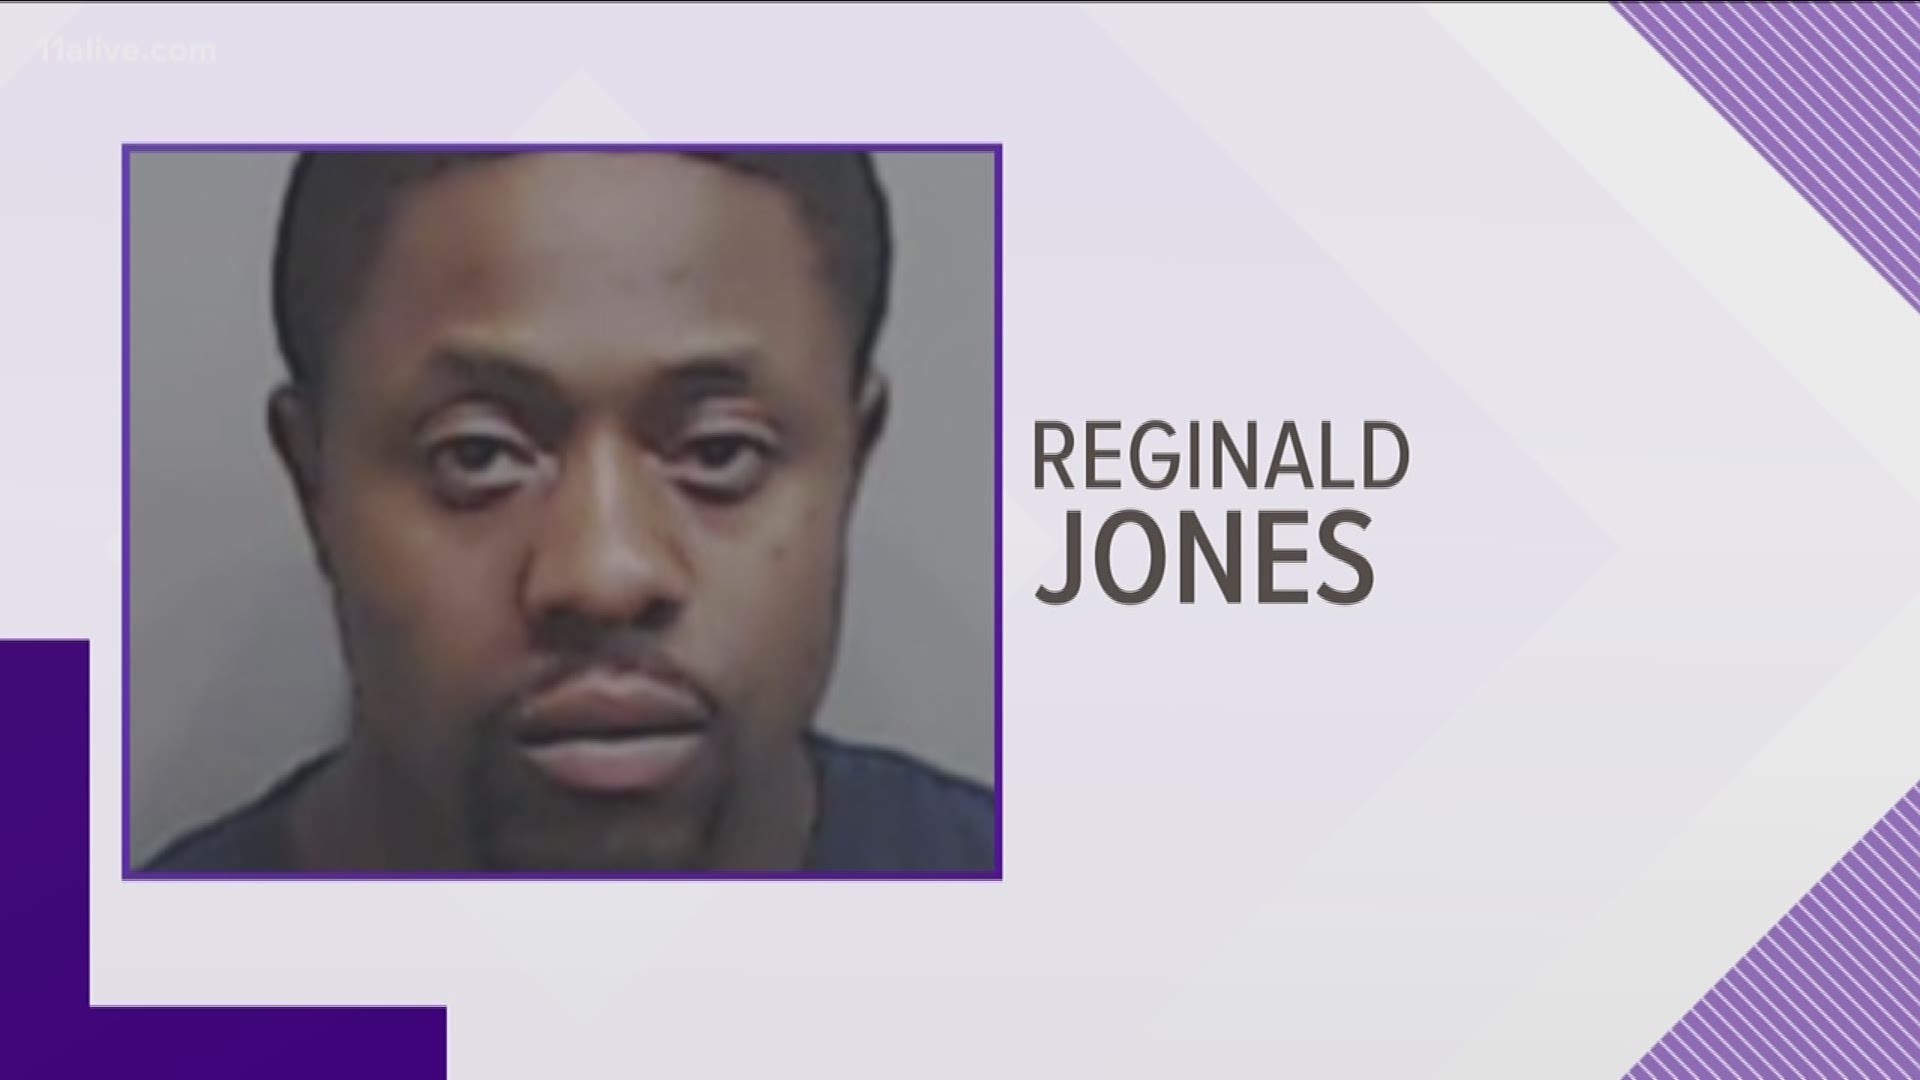 Reginald Jones told his girlfriend, Faith Bittinger, that if she ever left him, he would kill her. When she finally made the decision to leave their abusive relationship, he made good on his promise, prosecutors said.